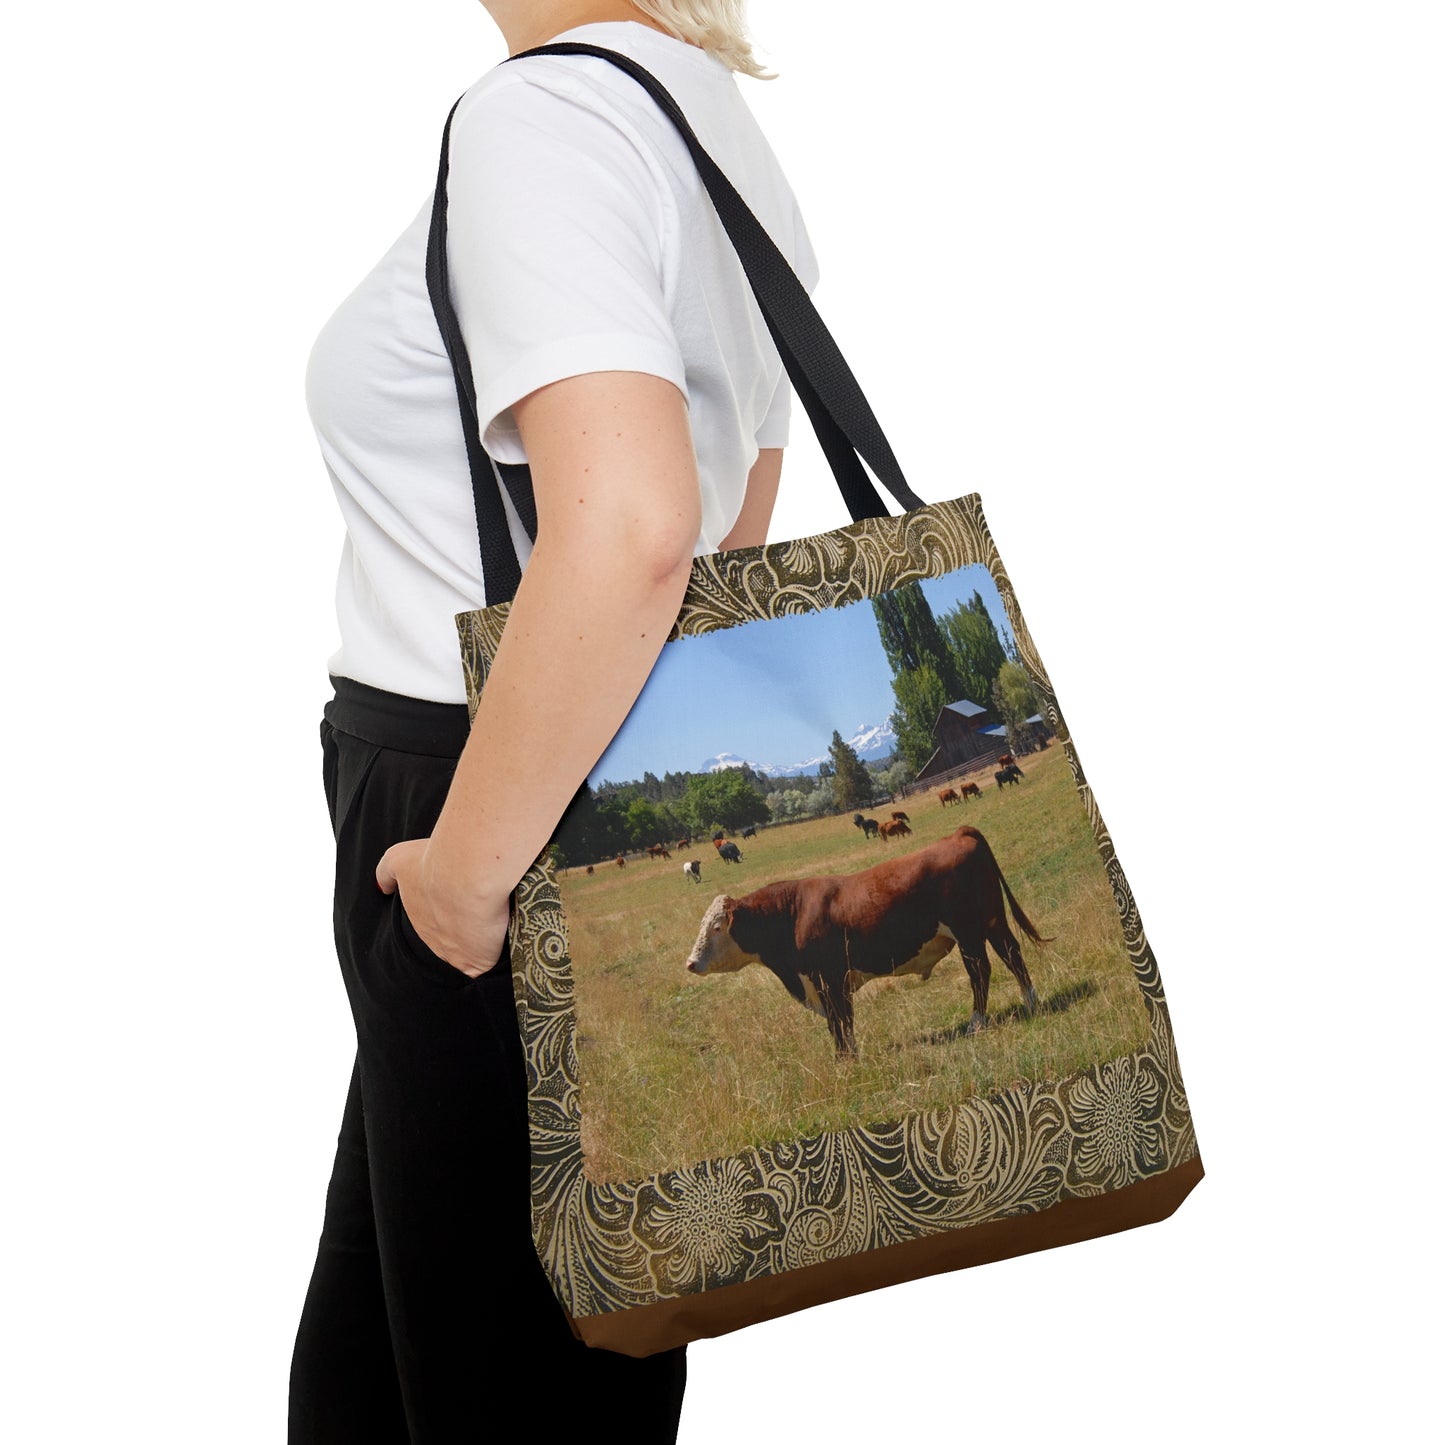 King Of The Pasture Tote Bag